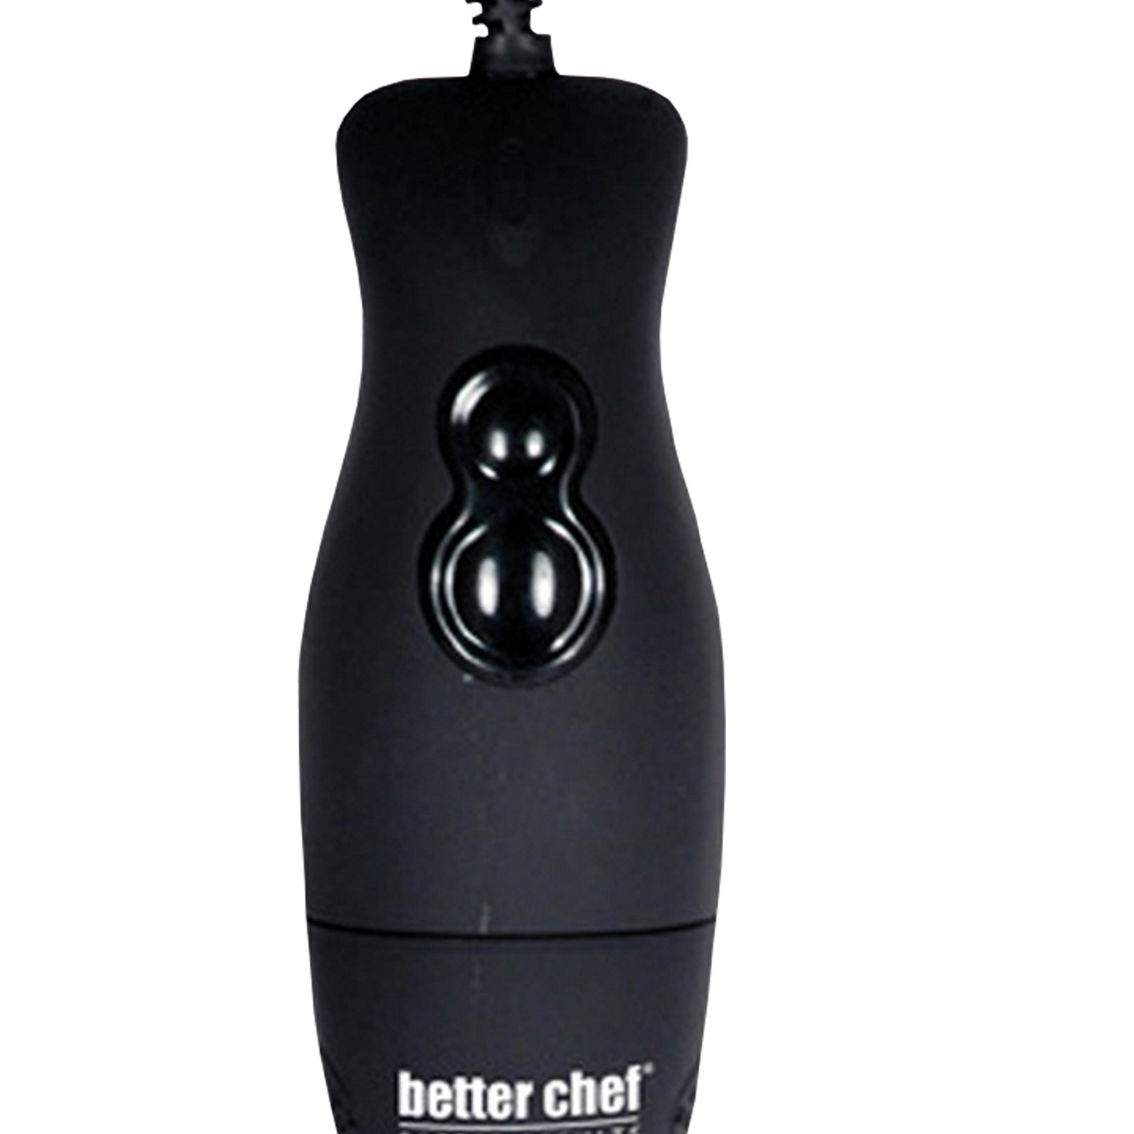 Better Chef DualPro Handheld Immersion Blender / Hand Mixer in Black - Image 3 of 4